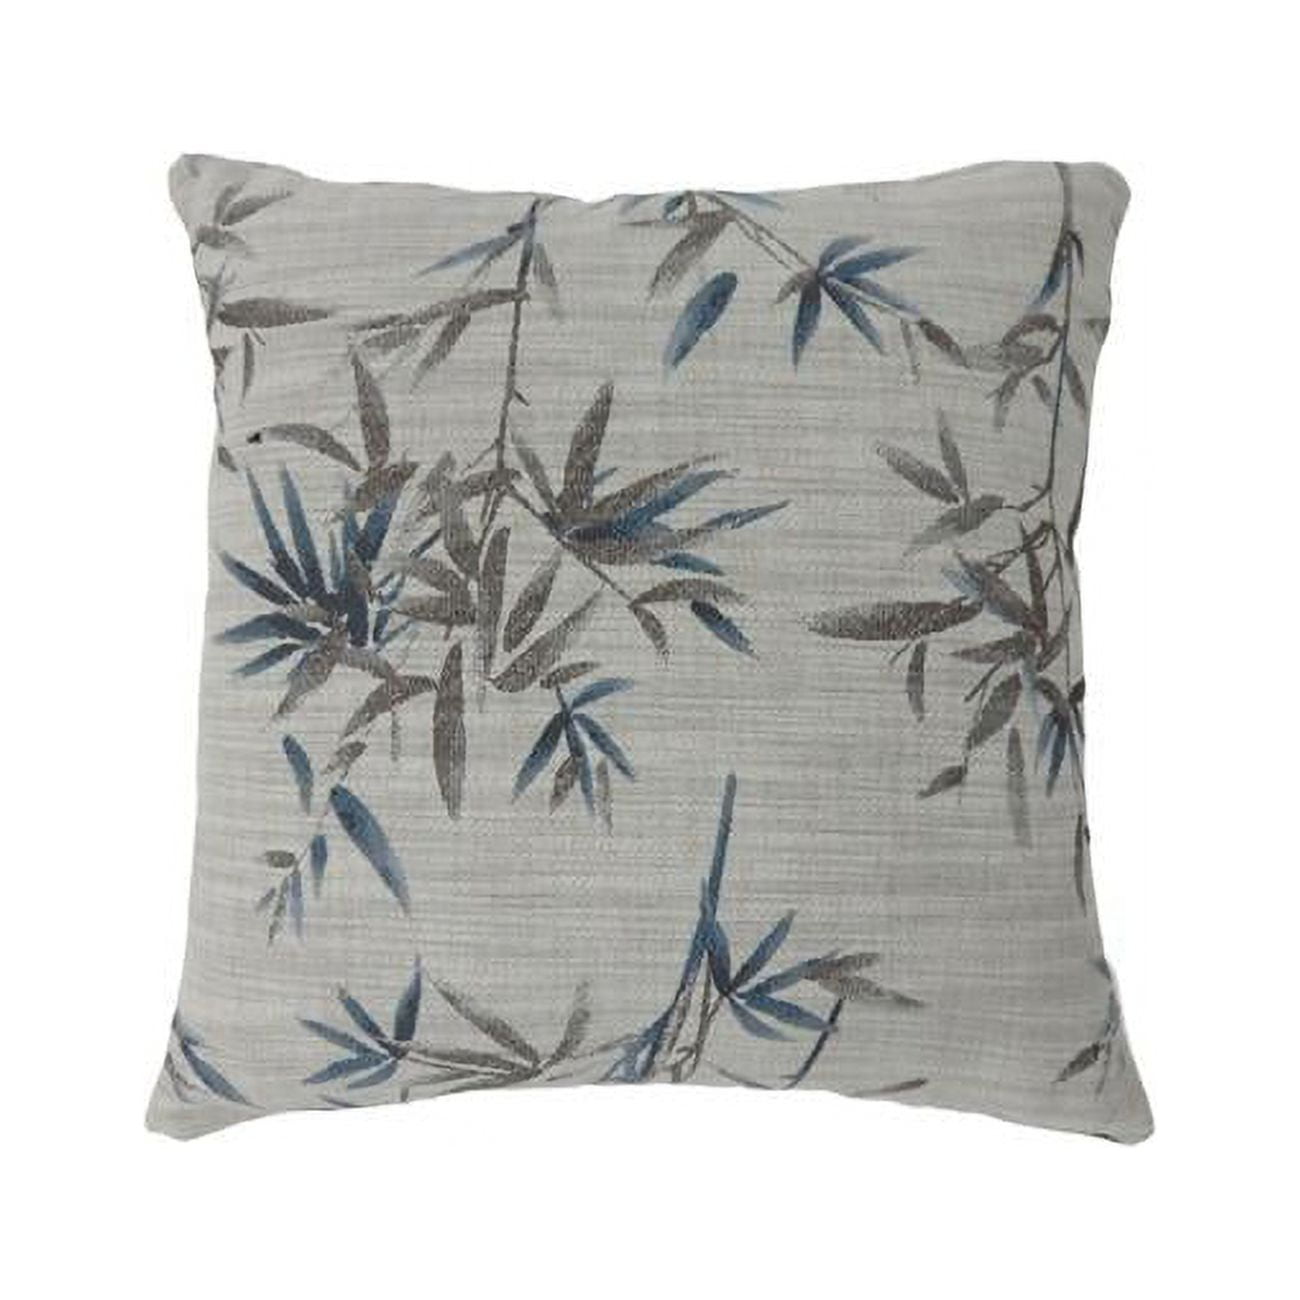 Picture of Benzara BM177983 Contemporary Style Throw Pillows, Blue - Set of 2 - 2 x 22 x 22 in.